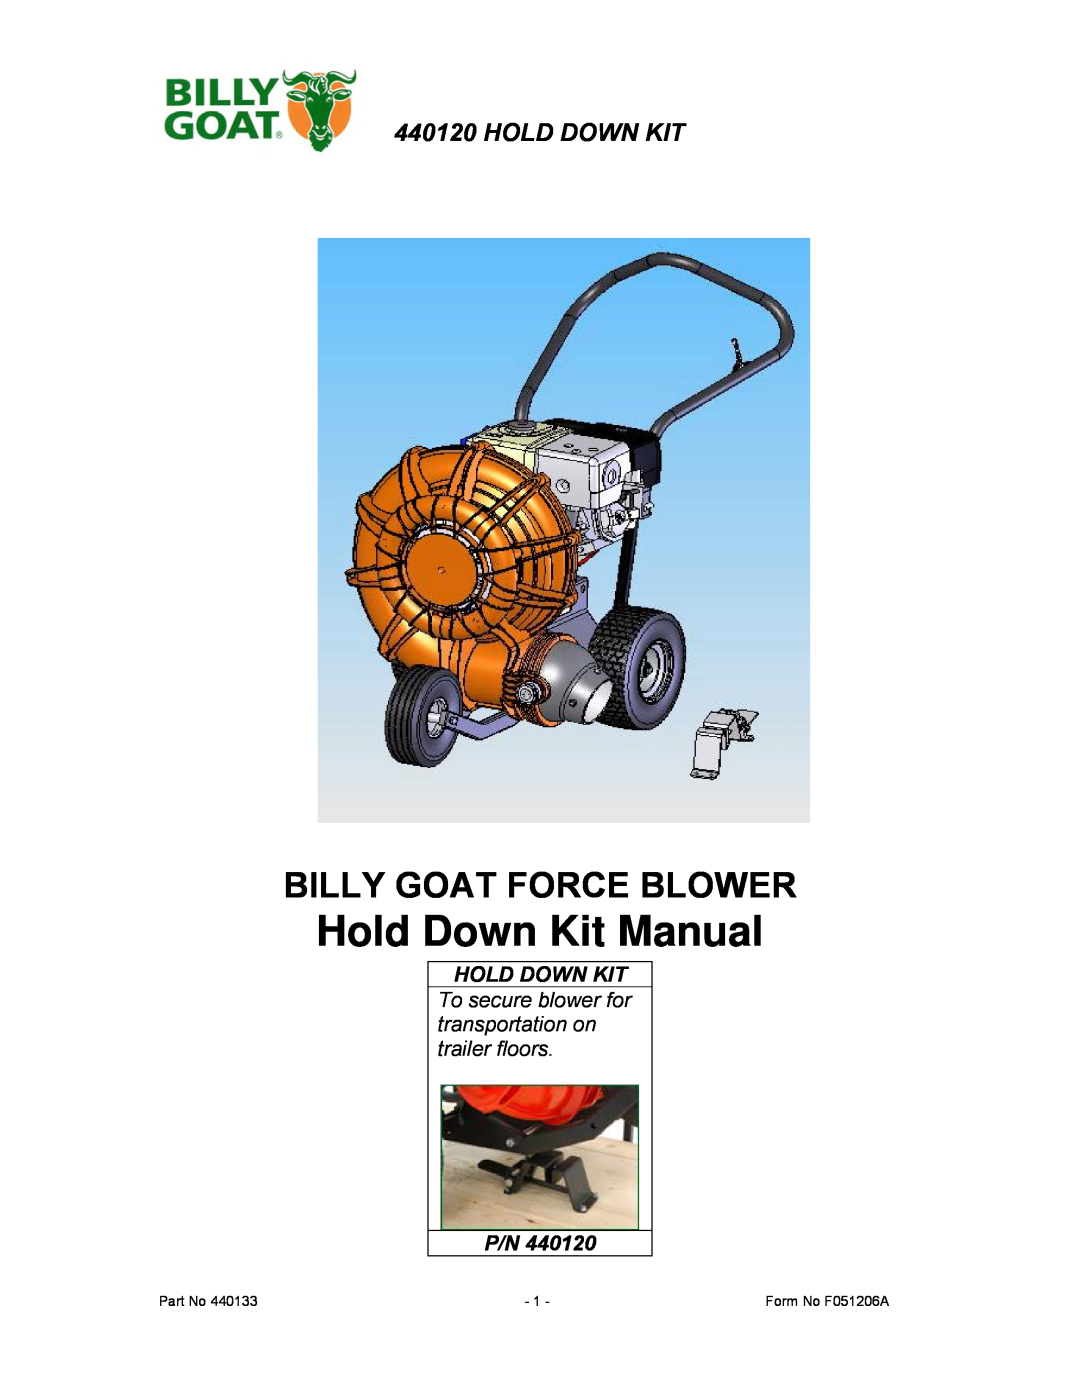 Billy Goat 440120 manual Hold Down Kit Manual, Billy Goat Force Blower, Form No F051206A 